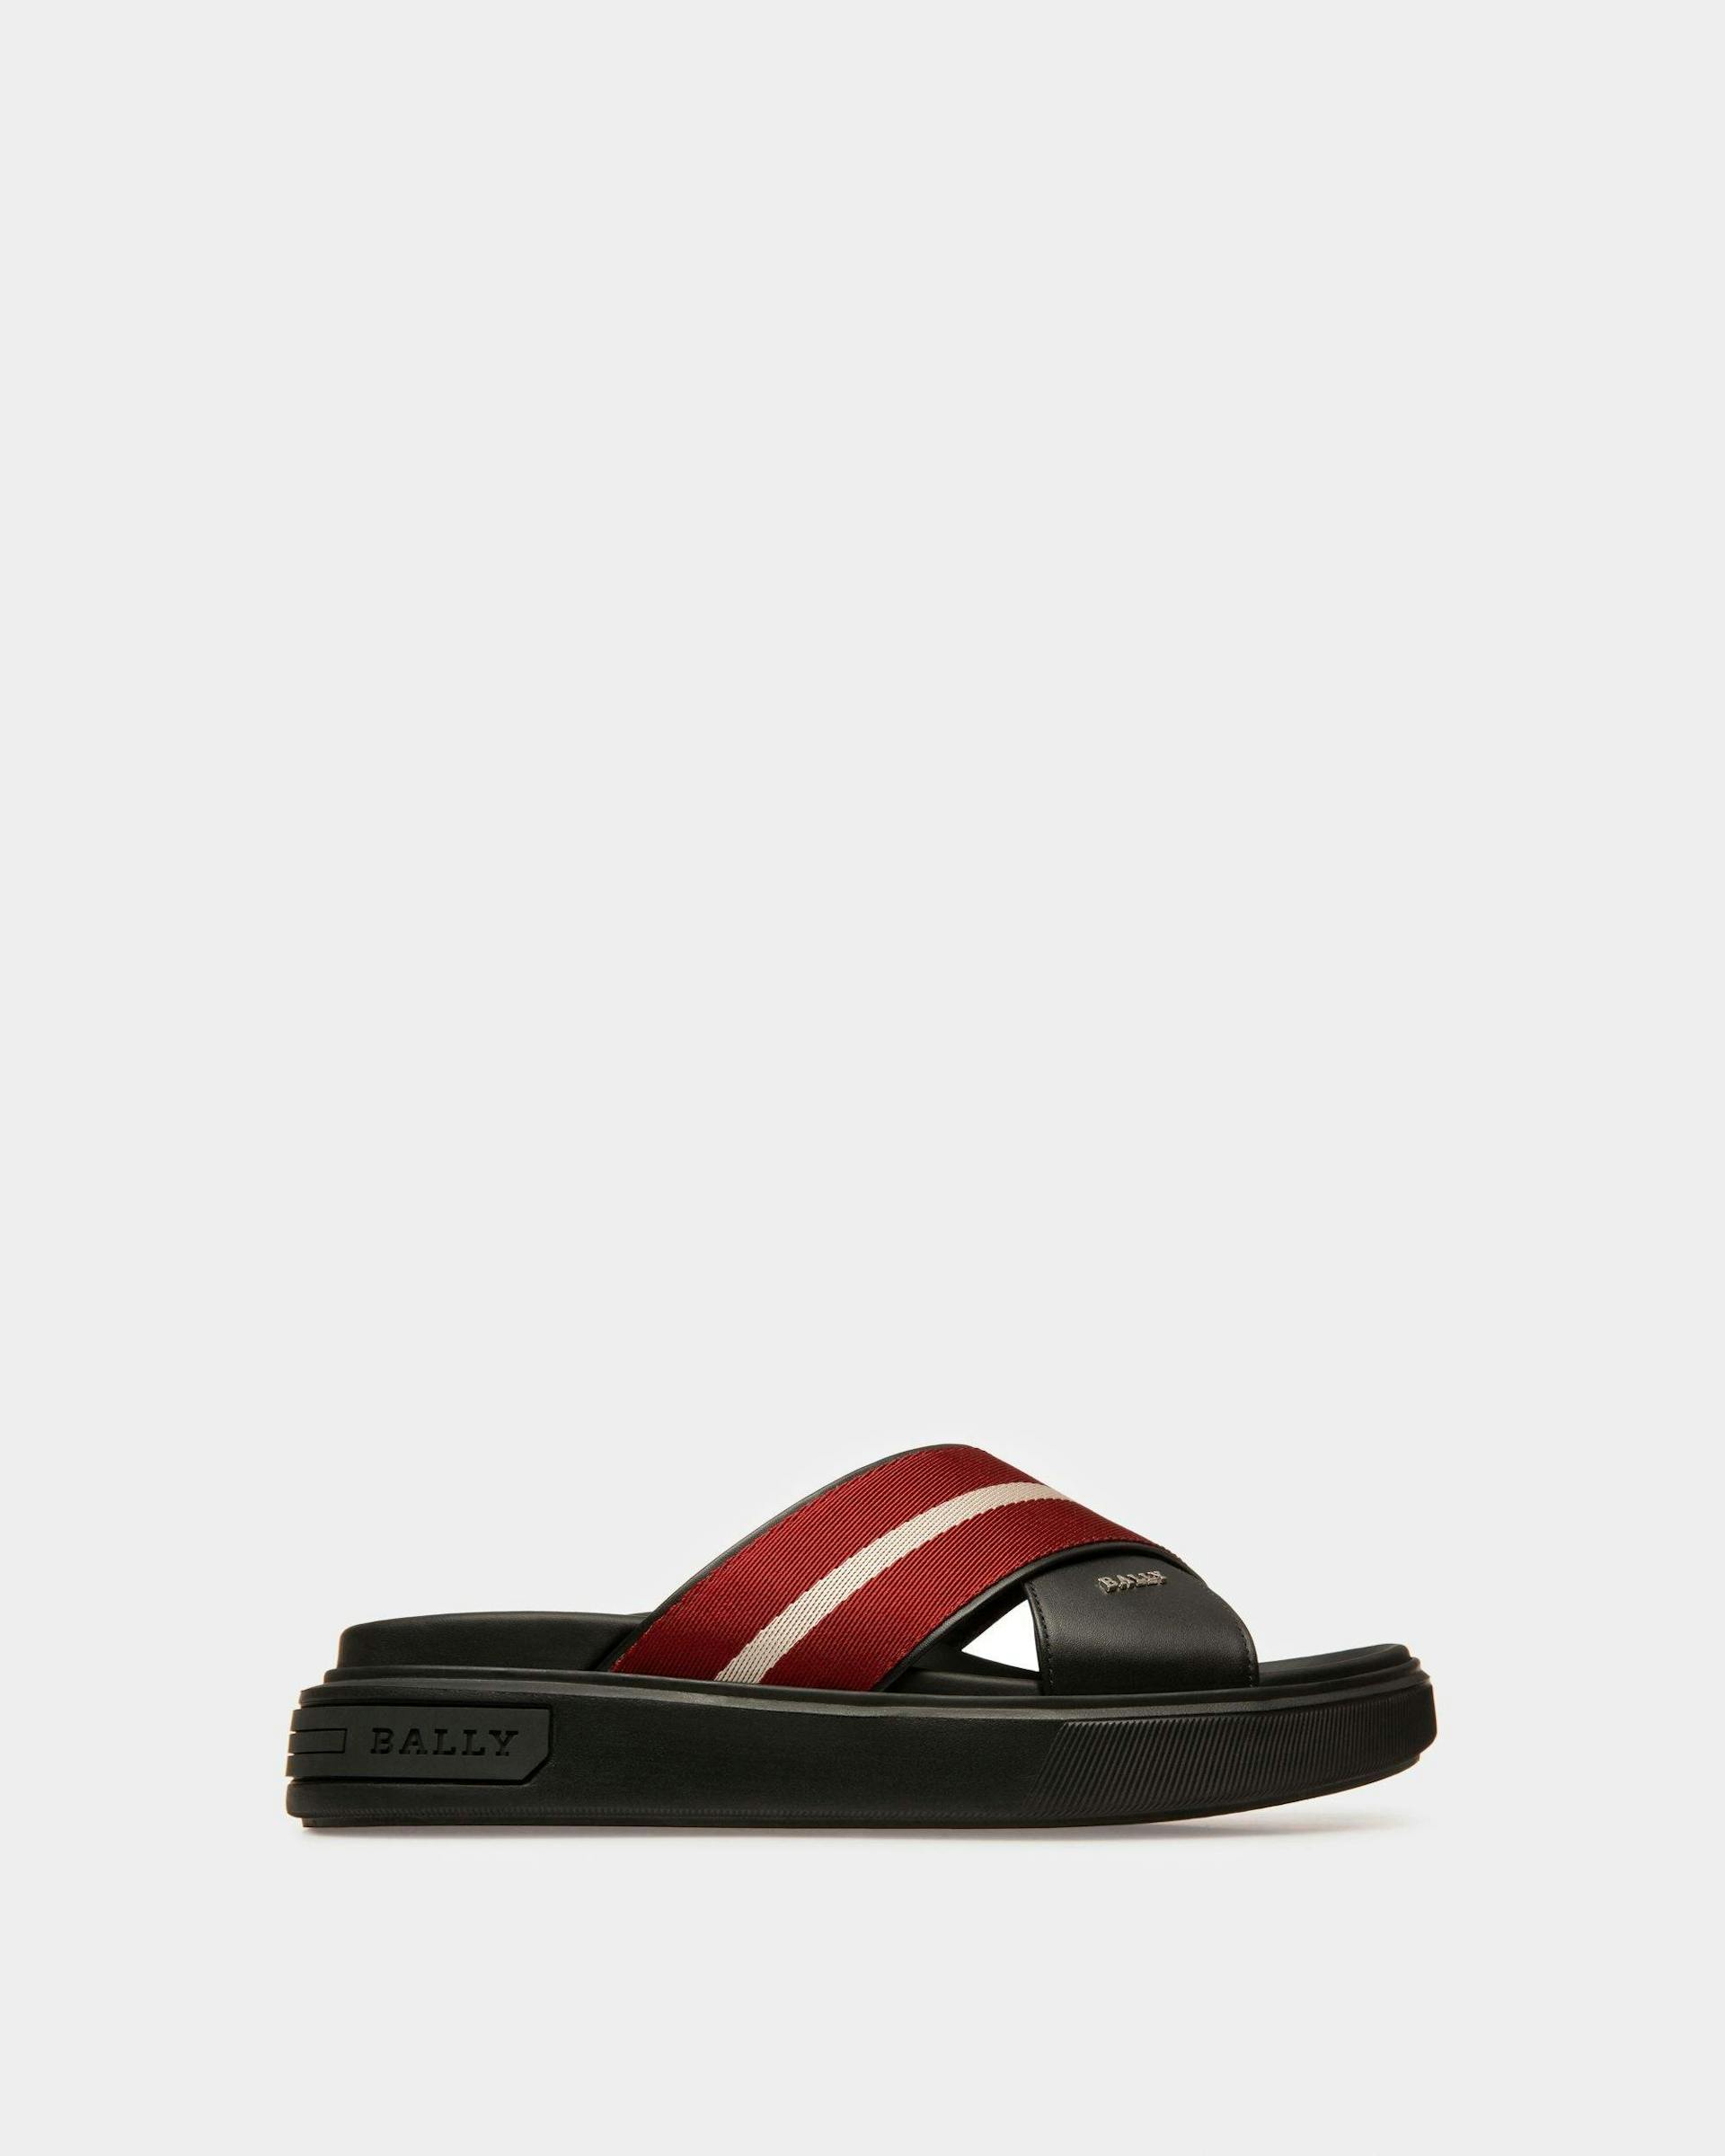 Jake Leather Sandals In Black & Bally Red - Men's - Bally - 01